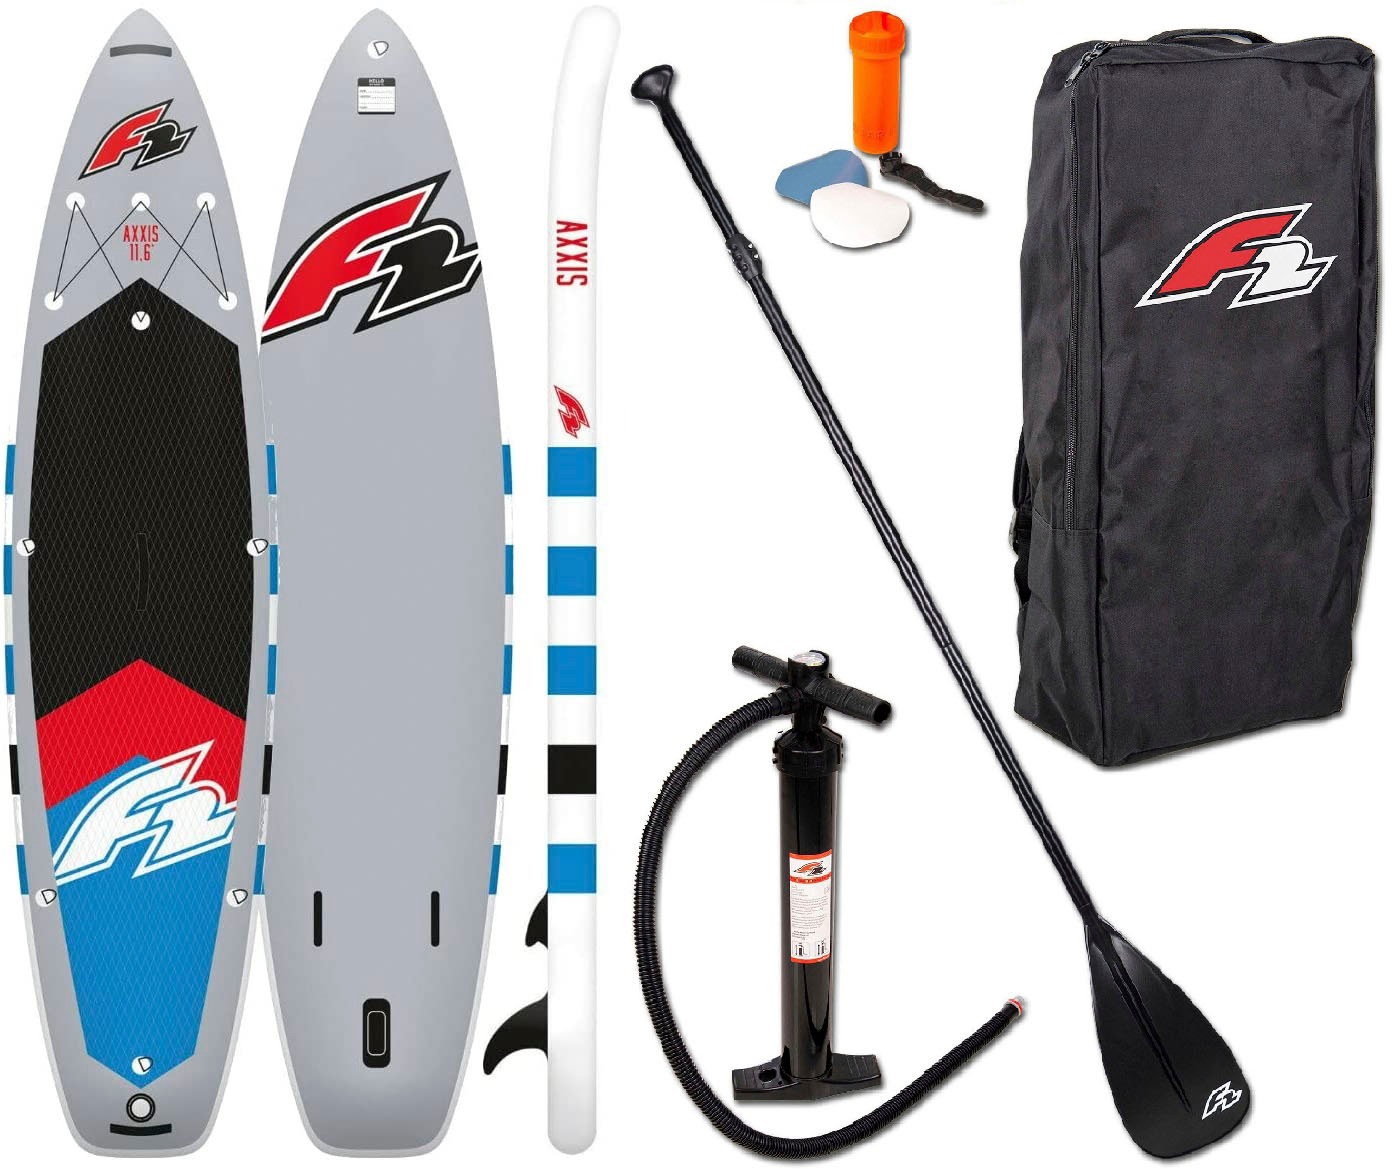 F2 Inflatable SUP-Board »Axxis 11,6 grey«, (Packung, 5 tlg.) kaufen bei OTTO